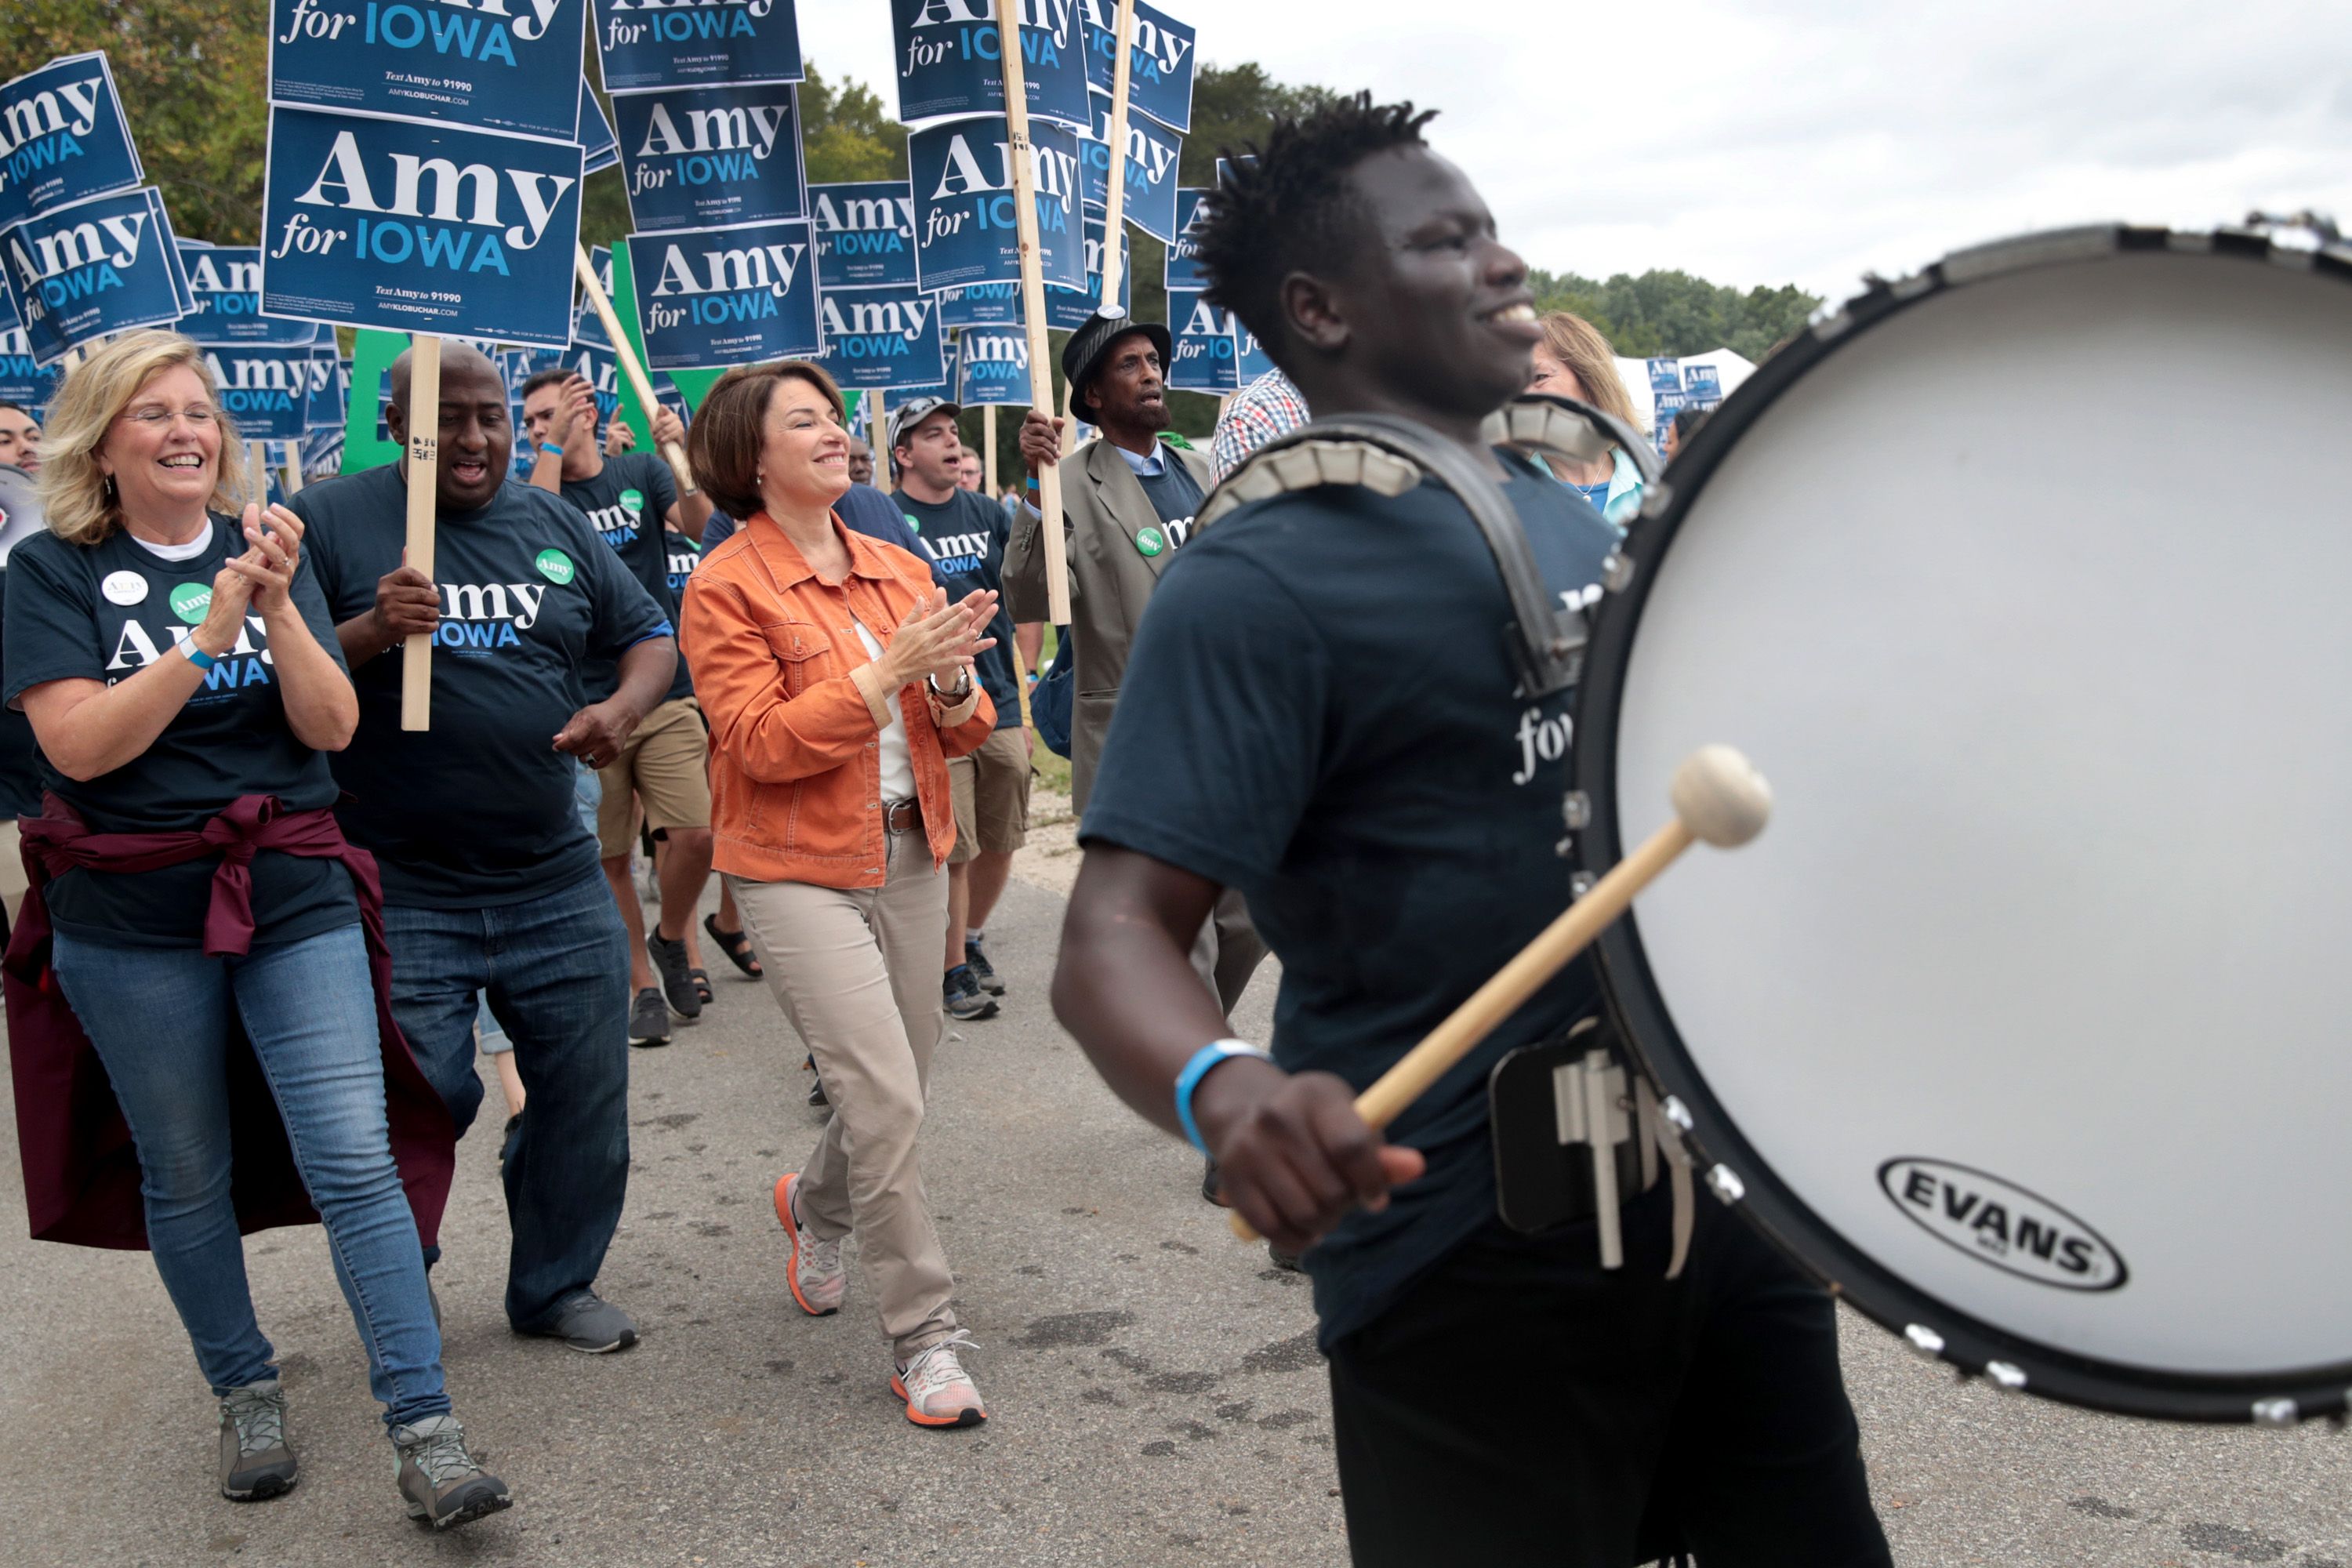  Democratic presidential candidate, Sen. Amy Klobuchar (D-MN) marches with supporters at the Polk County Democrats' Steak Fry on September 21, 2019 in Des Moines, Iowa.